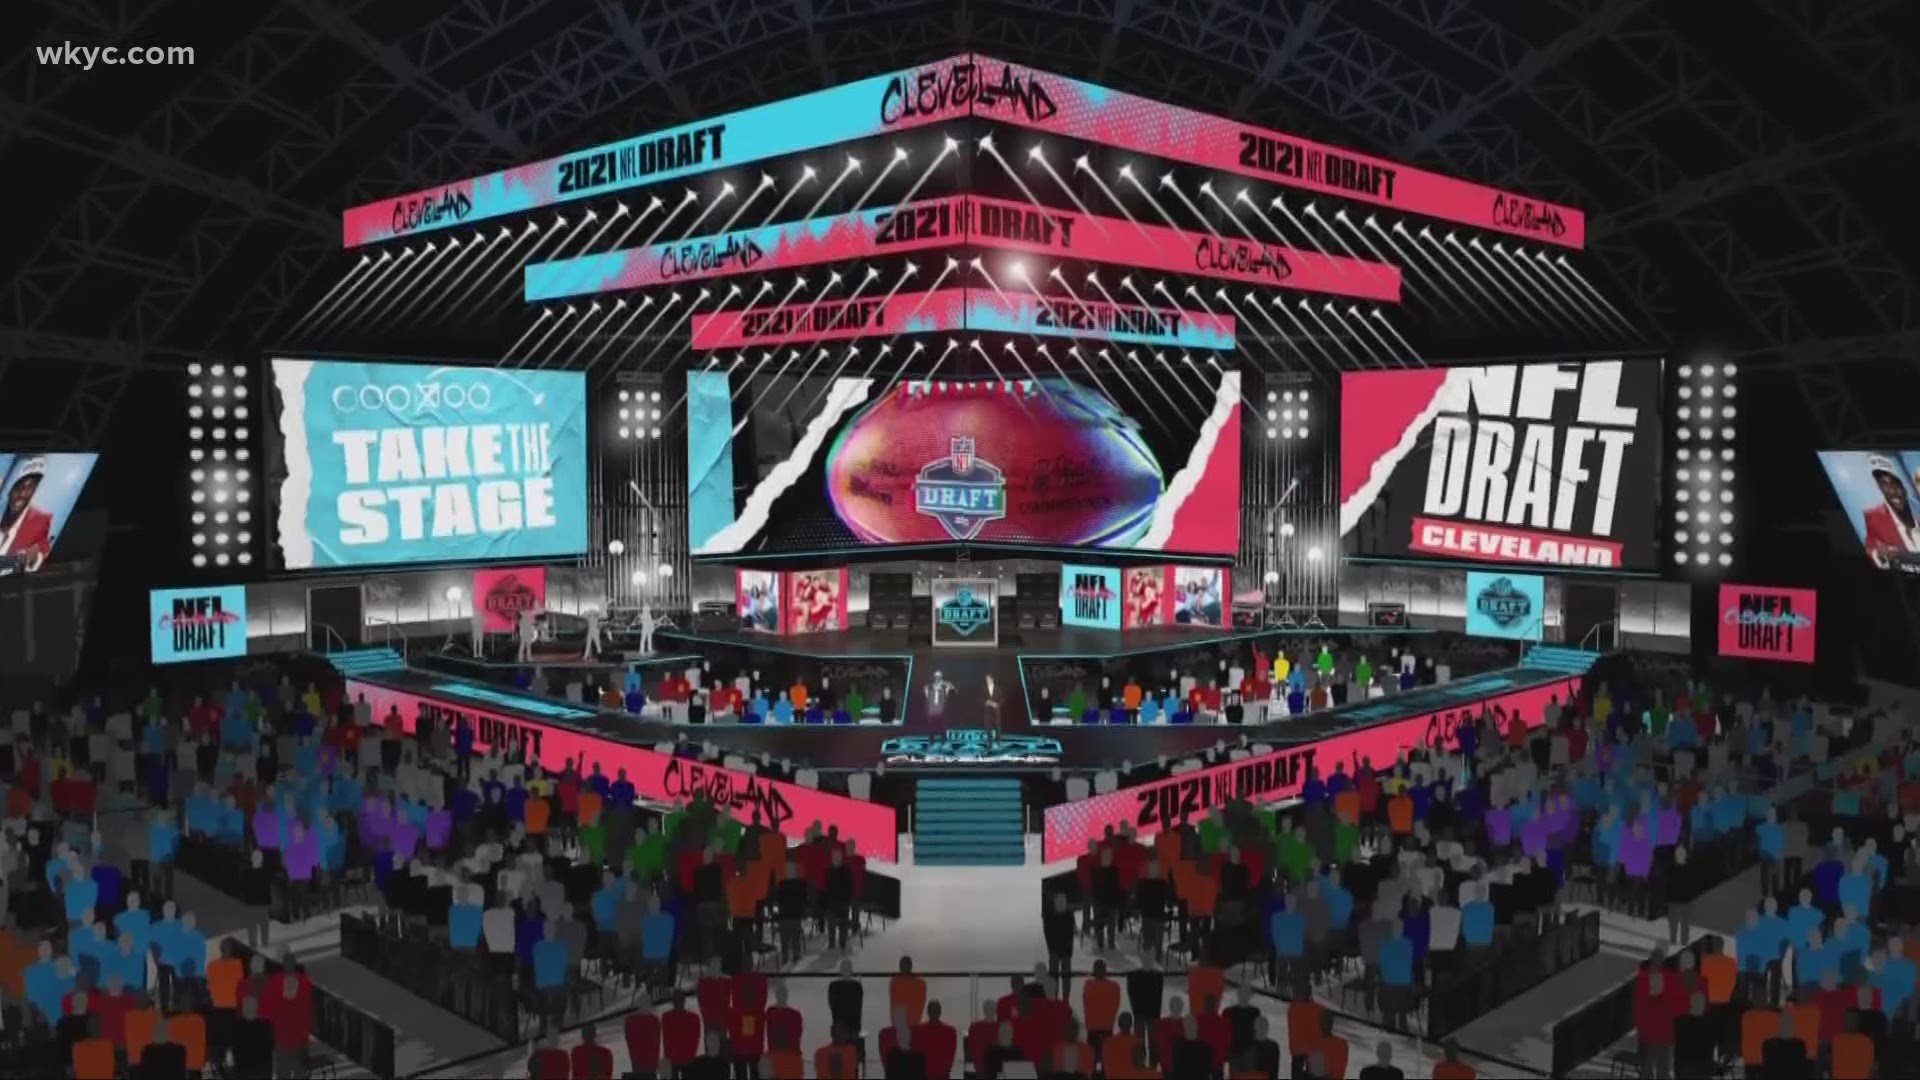 Construction on the main stage for the 2021 NFL Draft began on Tuesday.